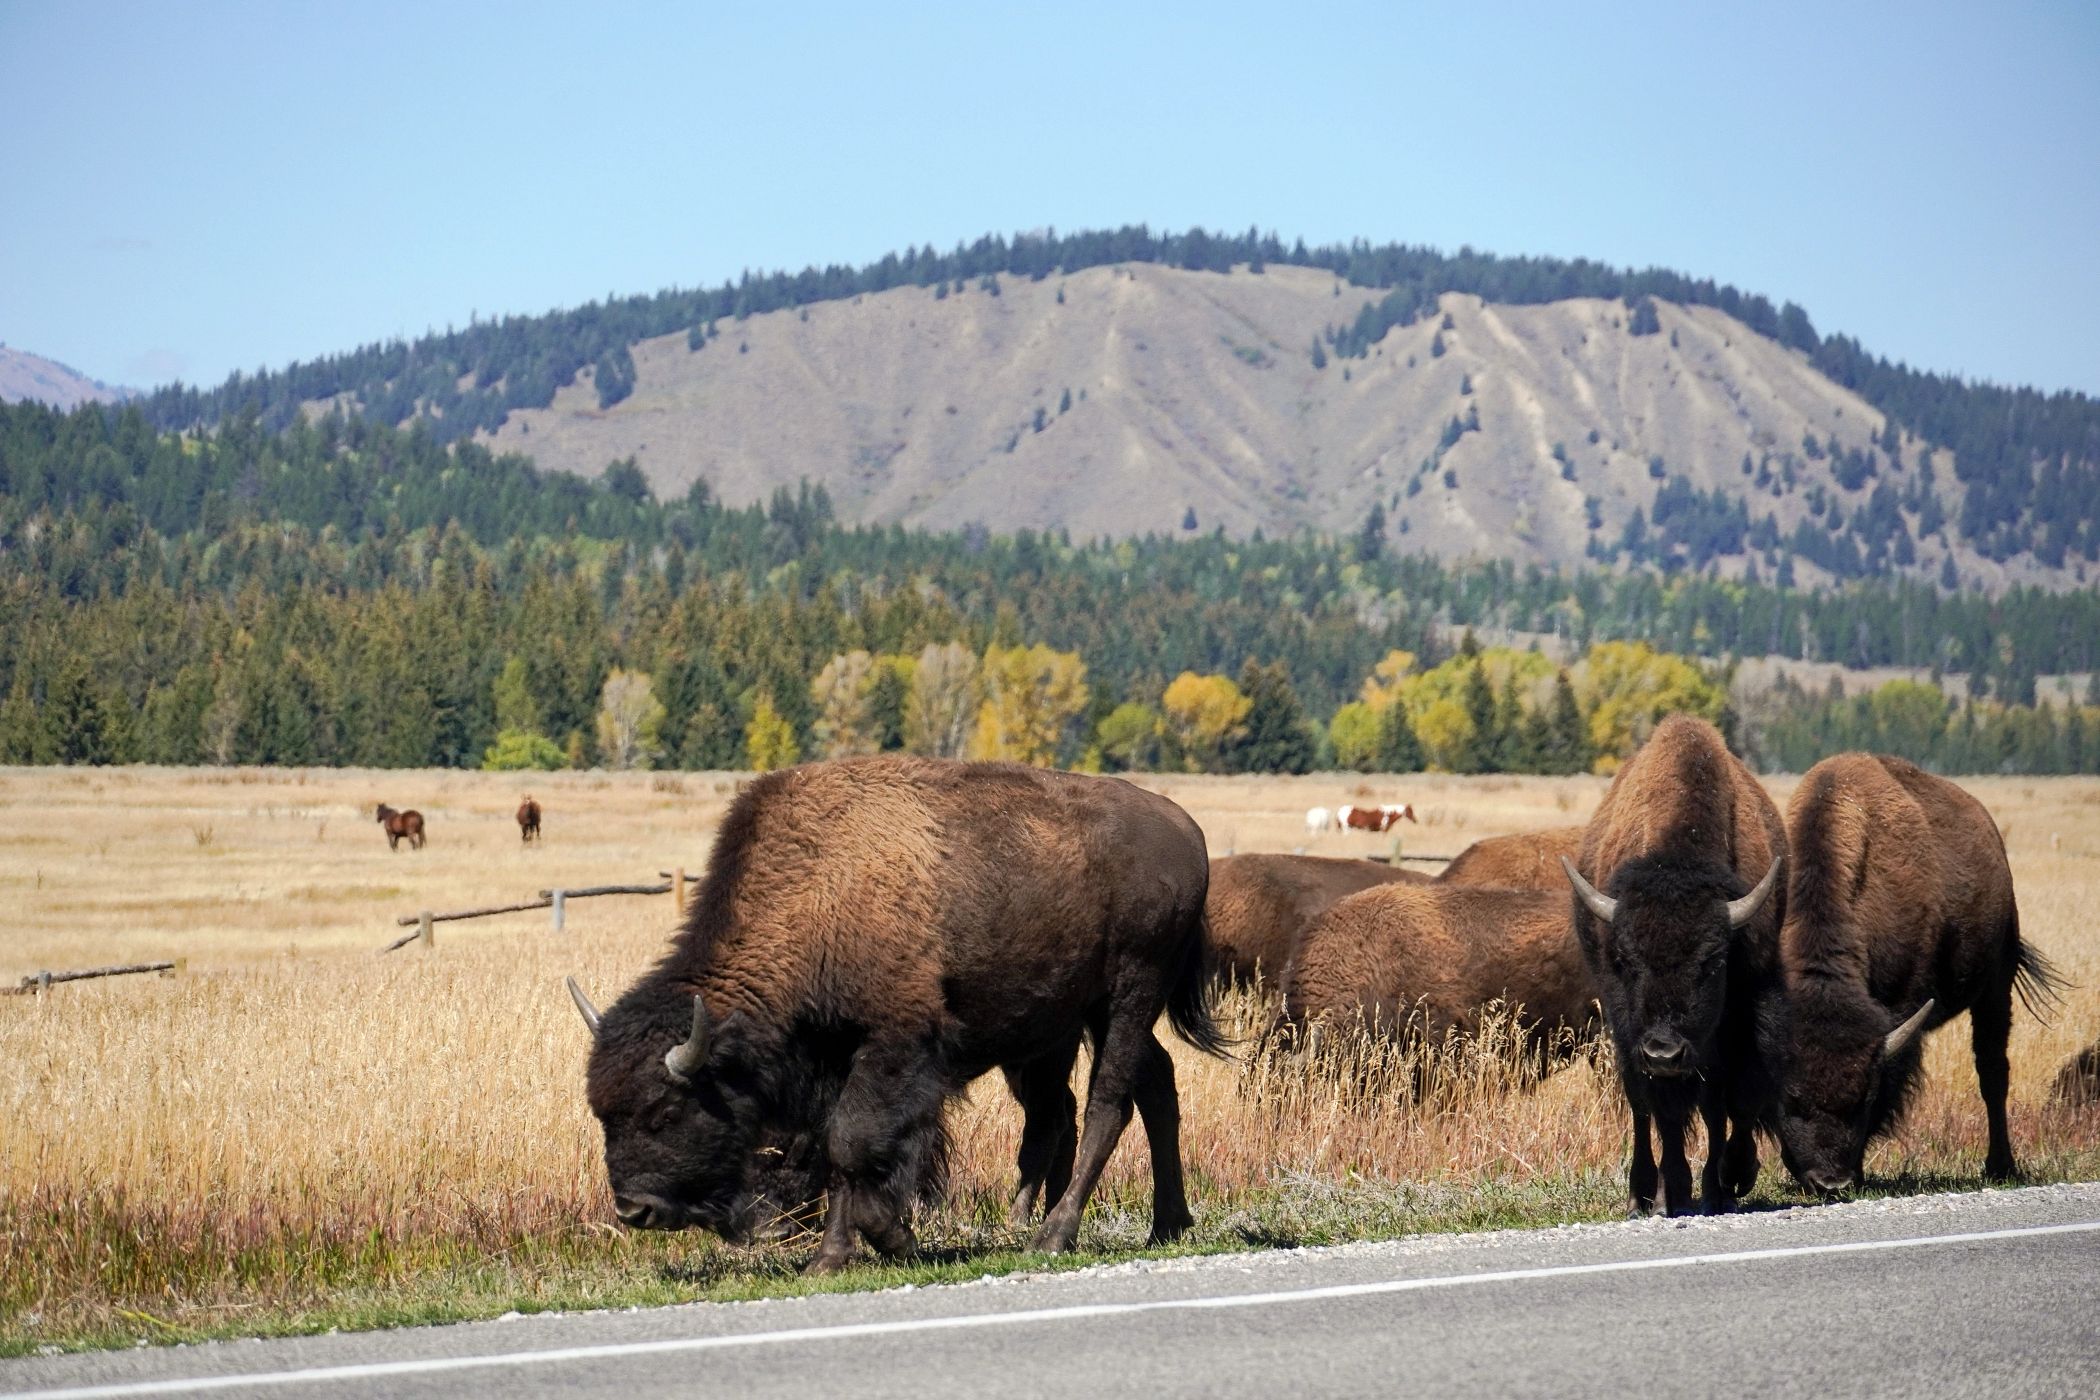 Bison along the side of the road